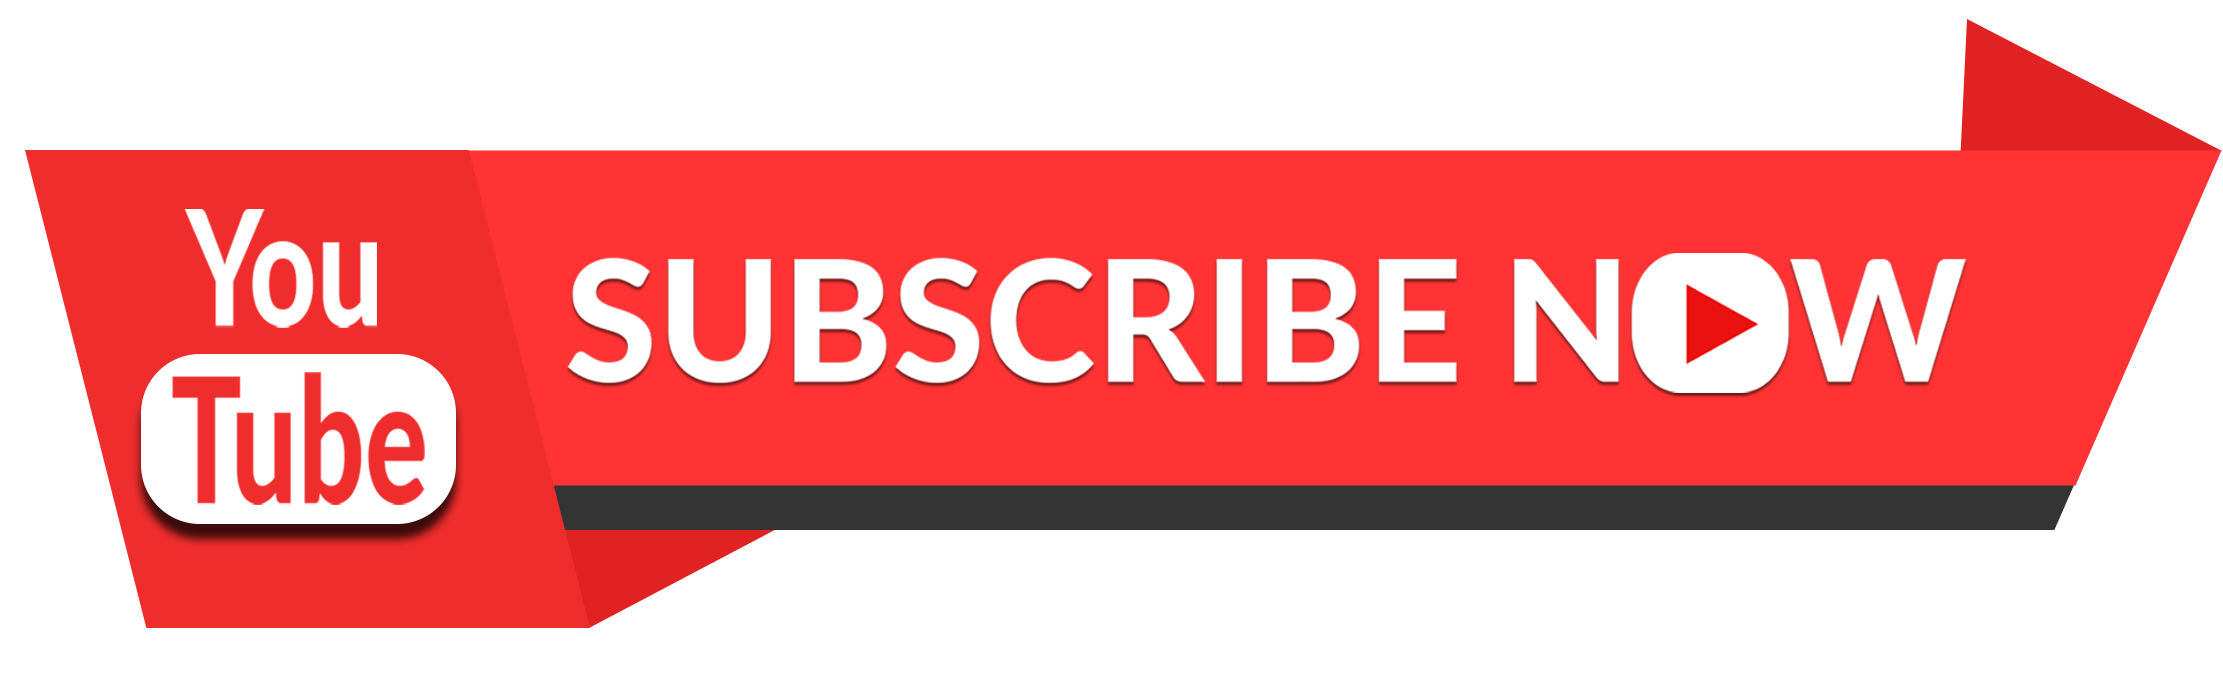 e28094pngtreee28094youtube20subscribe20button20vector20banner_4121884